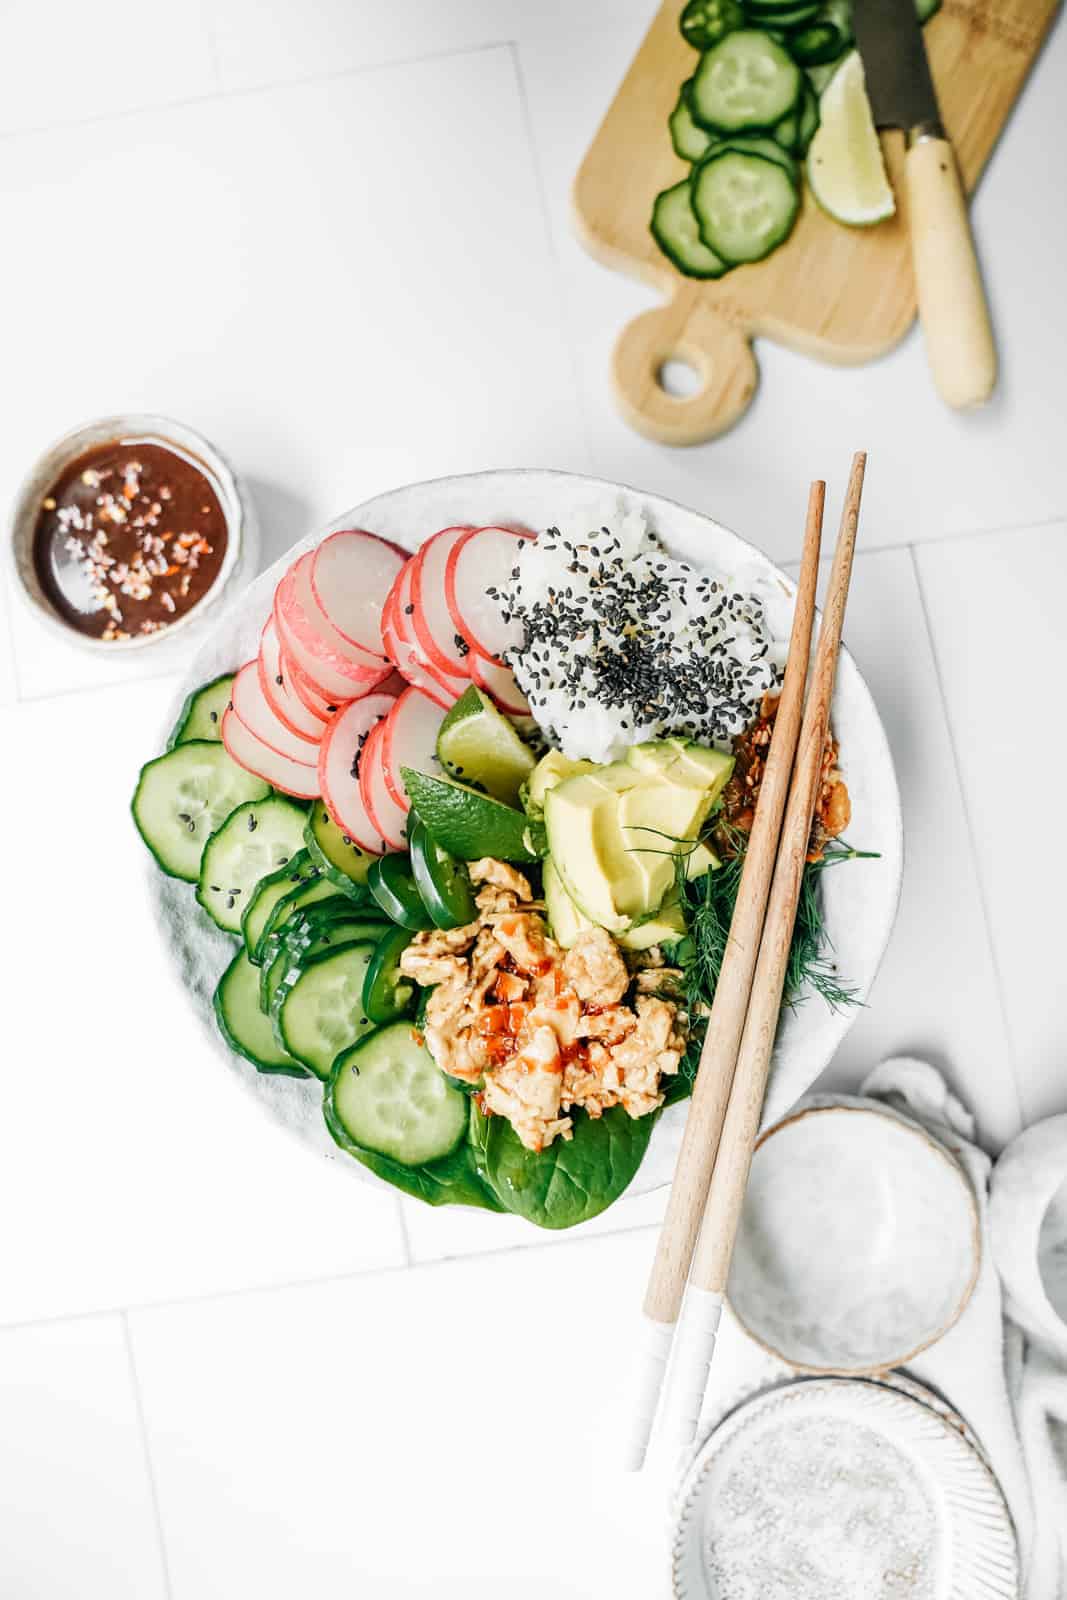 Vegan Poke Bowl sitting on table surrounded by ingredients like cucumber, spicy chilli sauce, and served with chopsticks.